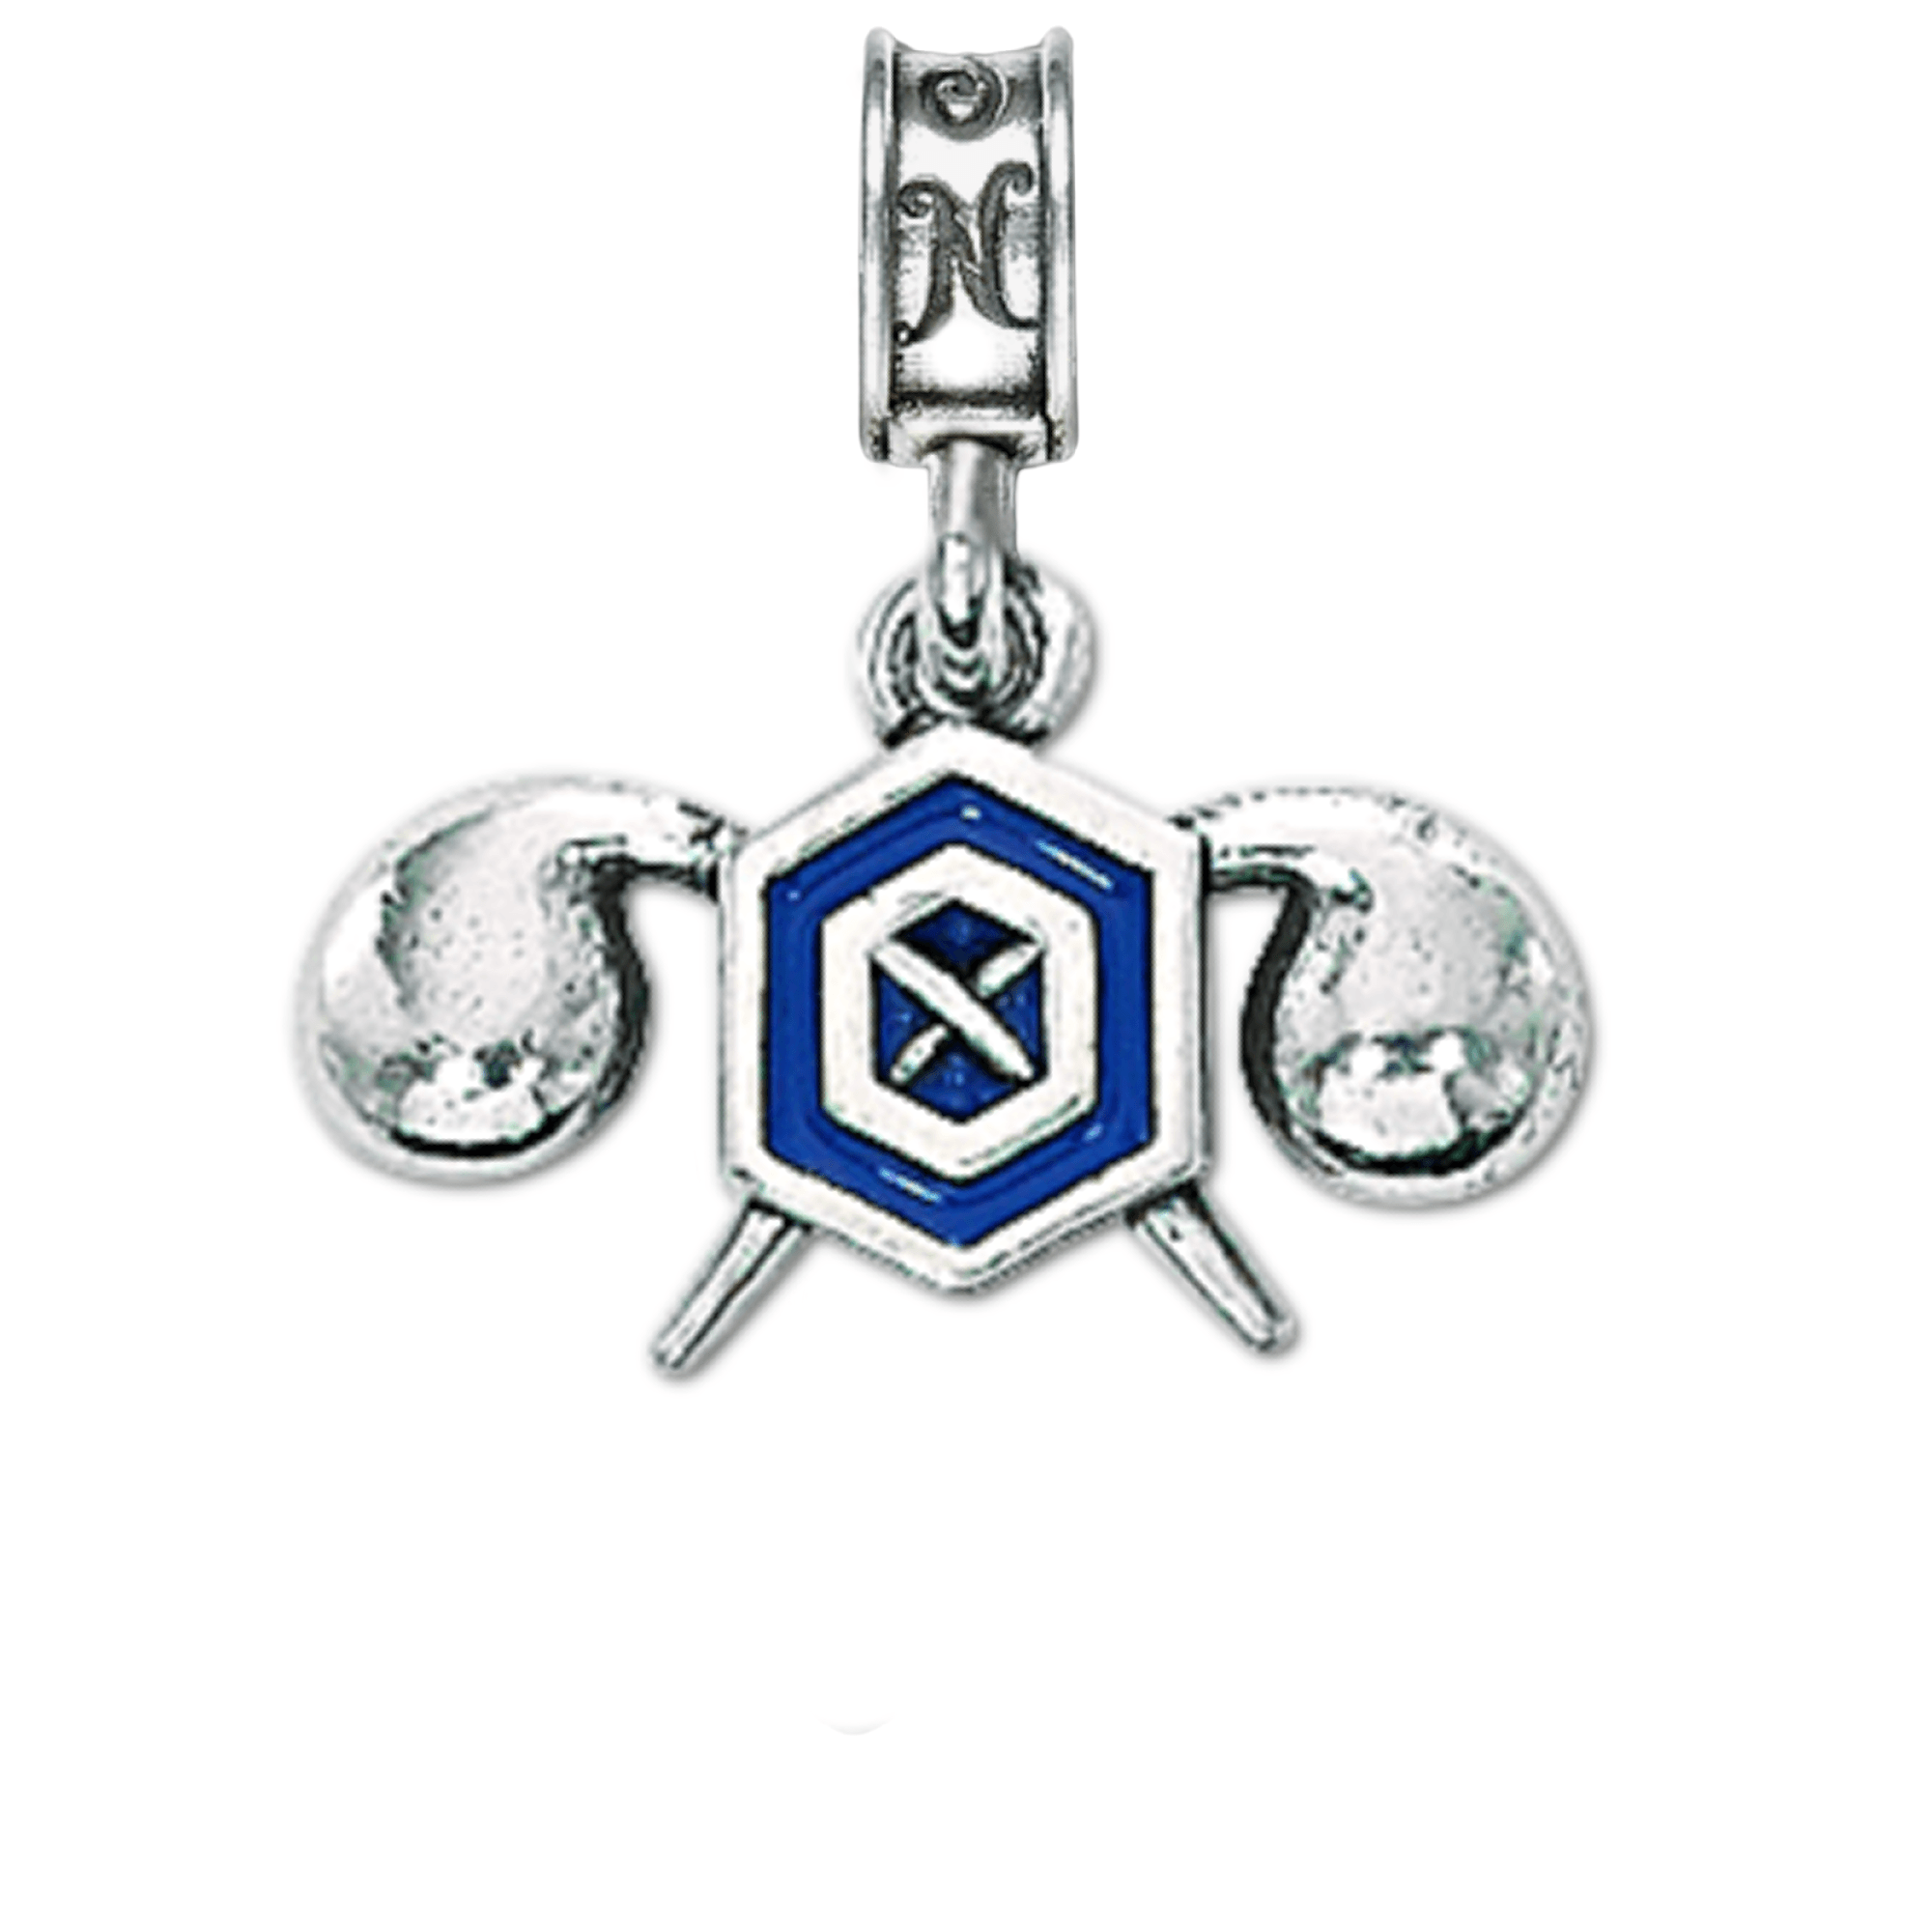 Military Jewelry, Military Charms, Military Gifts, Chemical Corps Insignia Charm